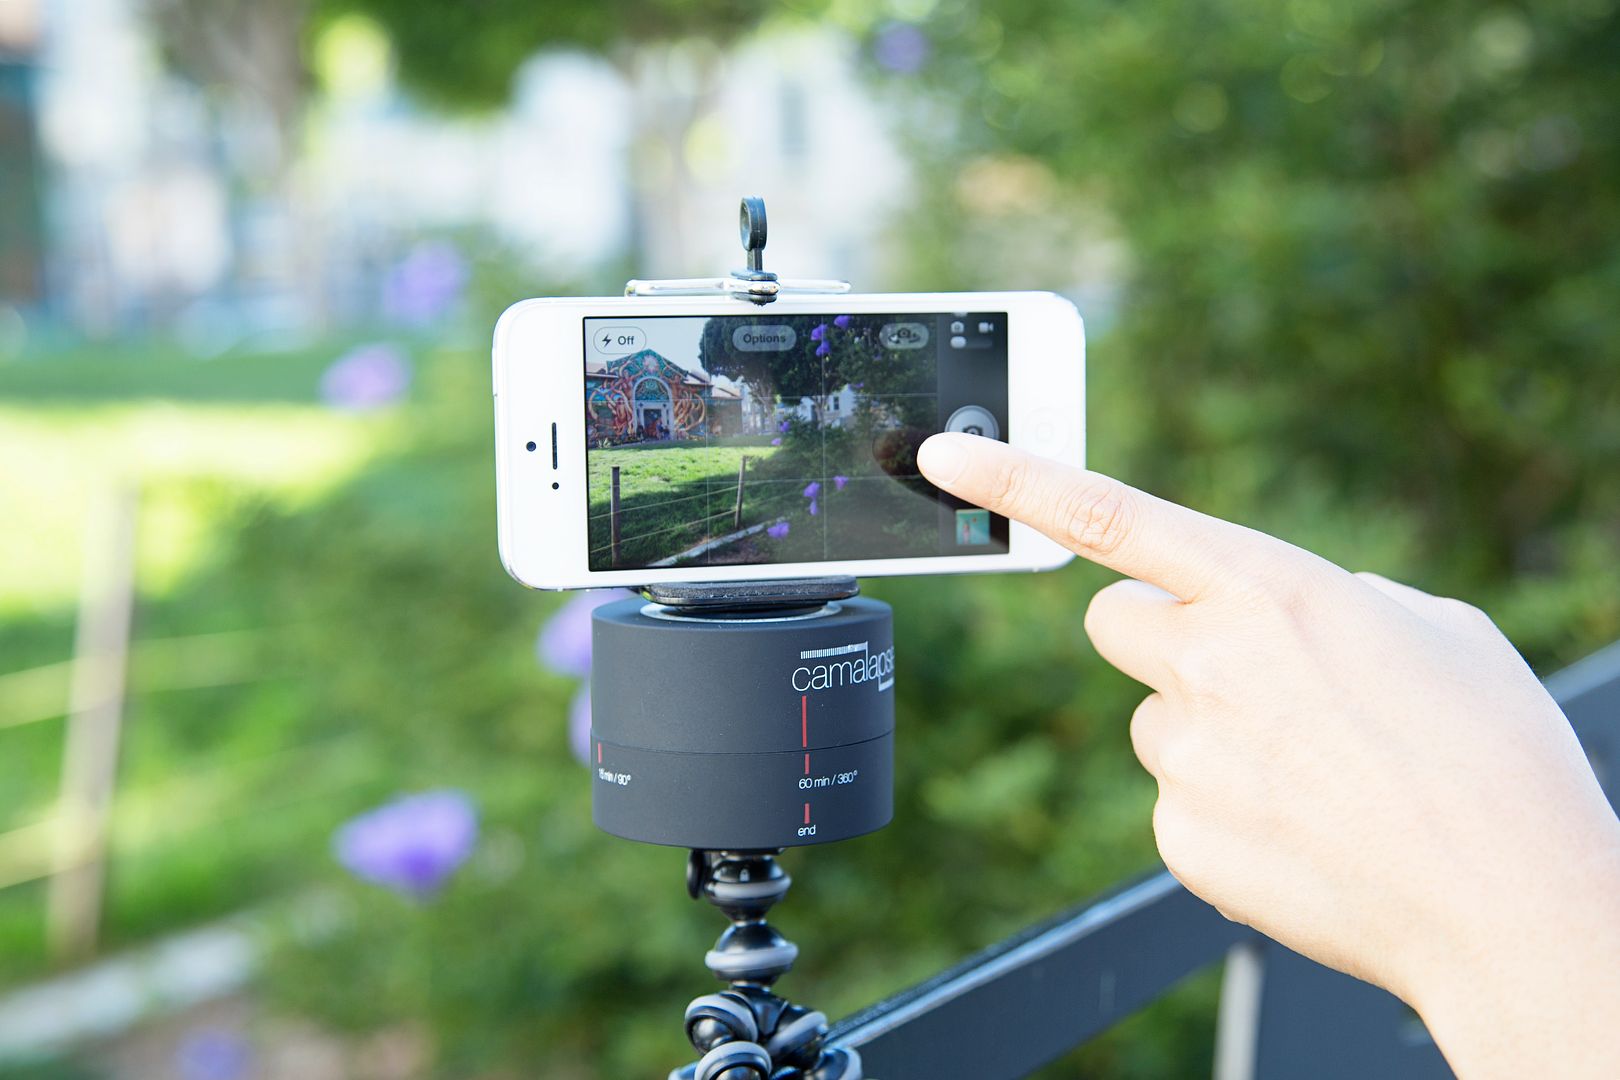 Tech gifts under $50: Camalapse Time-Lapse Video Mount